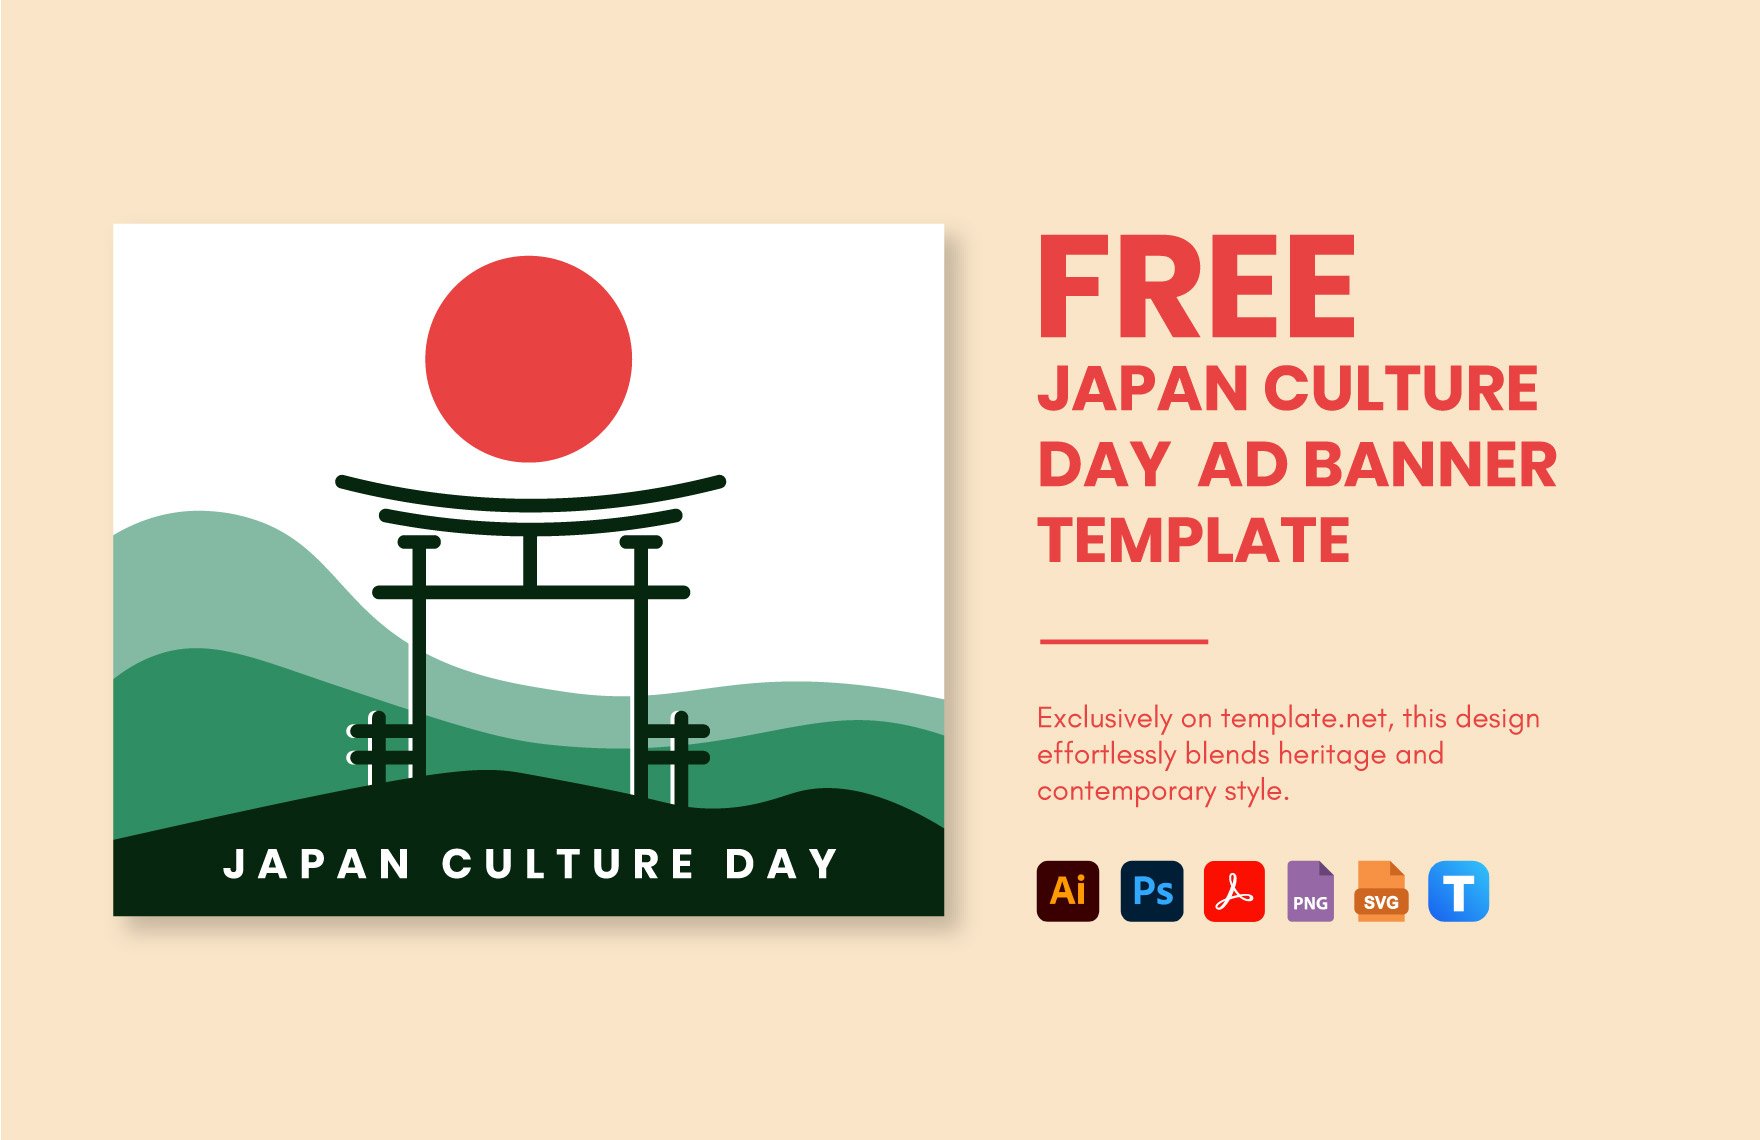 Free Japan Culture Day Ad Banner Template in PDF, Illustrator, PSD, SVG, PNG